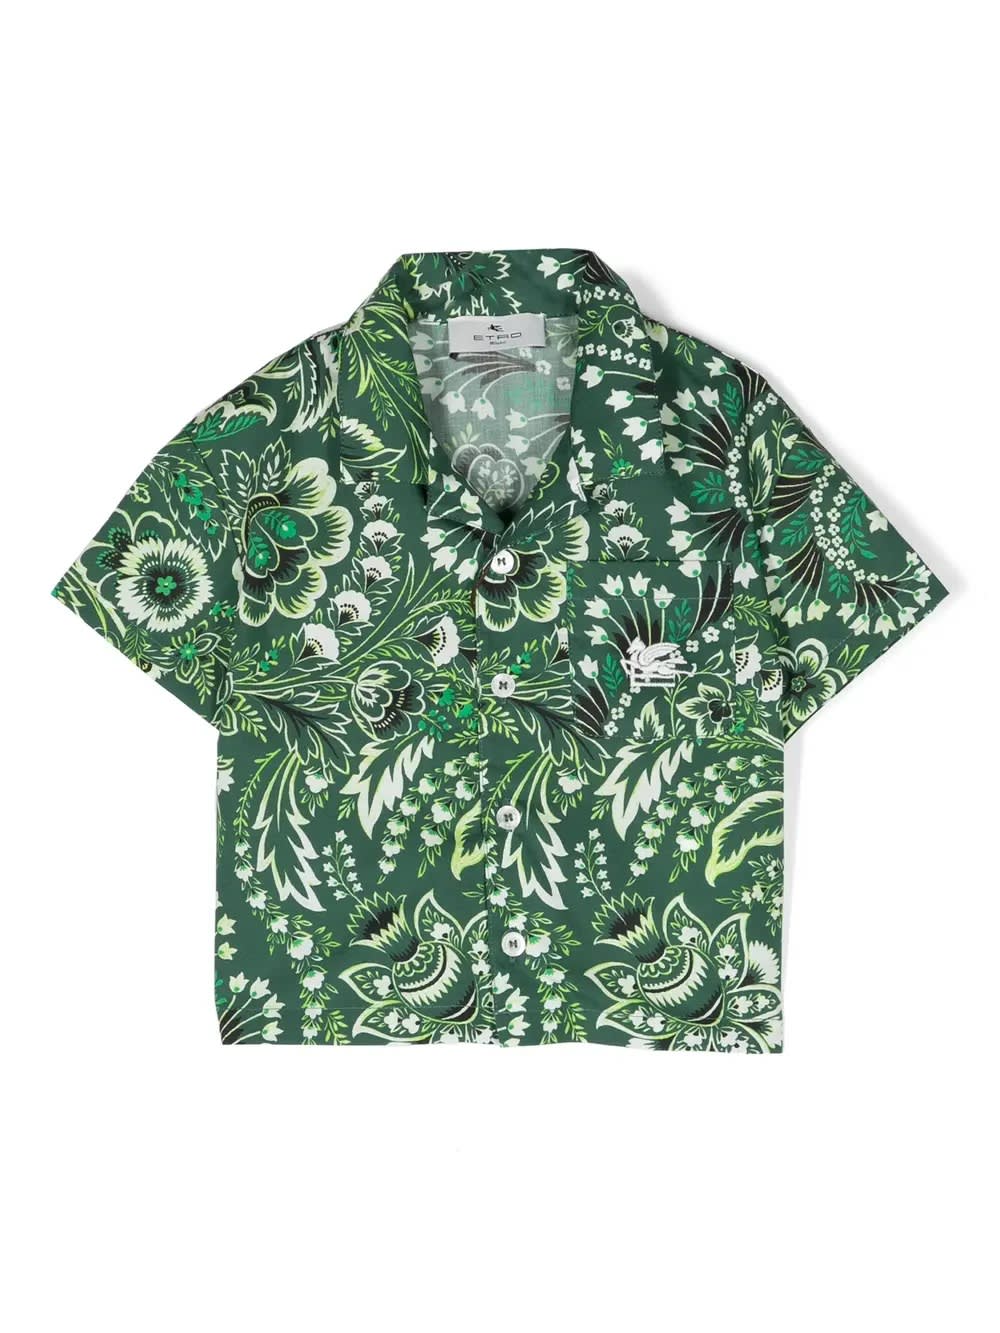 Etro Babies' Green Bowling Shirt With Paisley Print